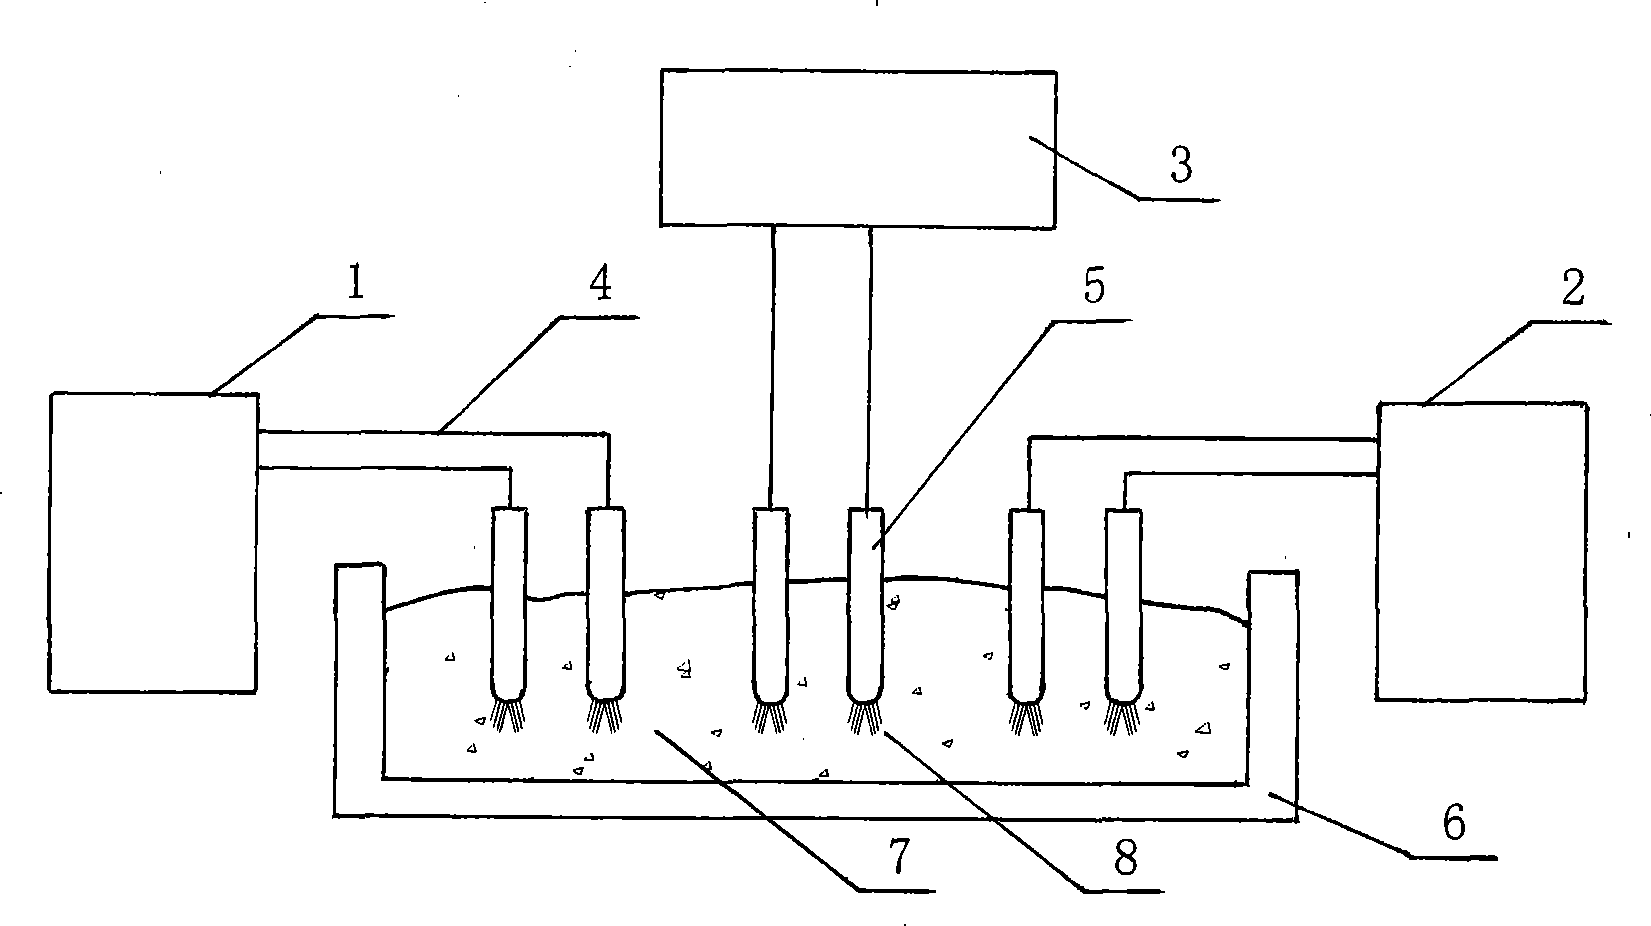 Multi-loop direct-current power supply smelting ore furnace